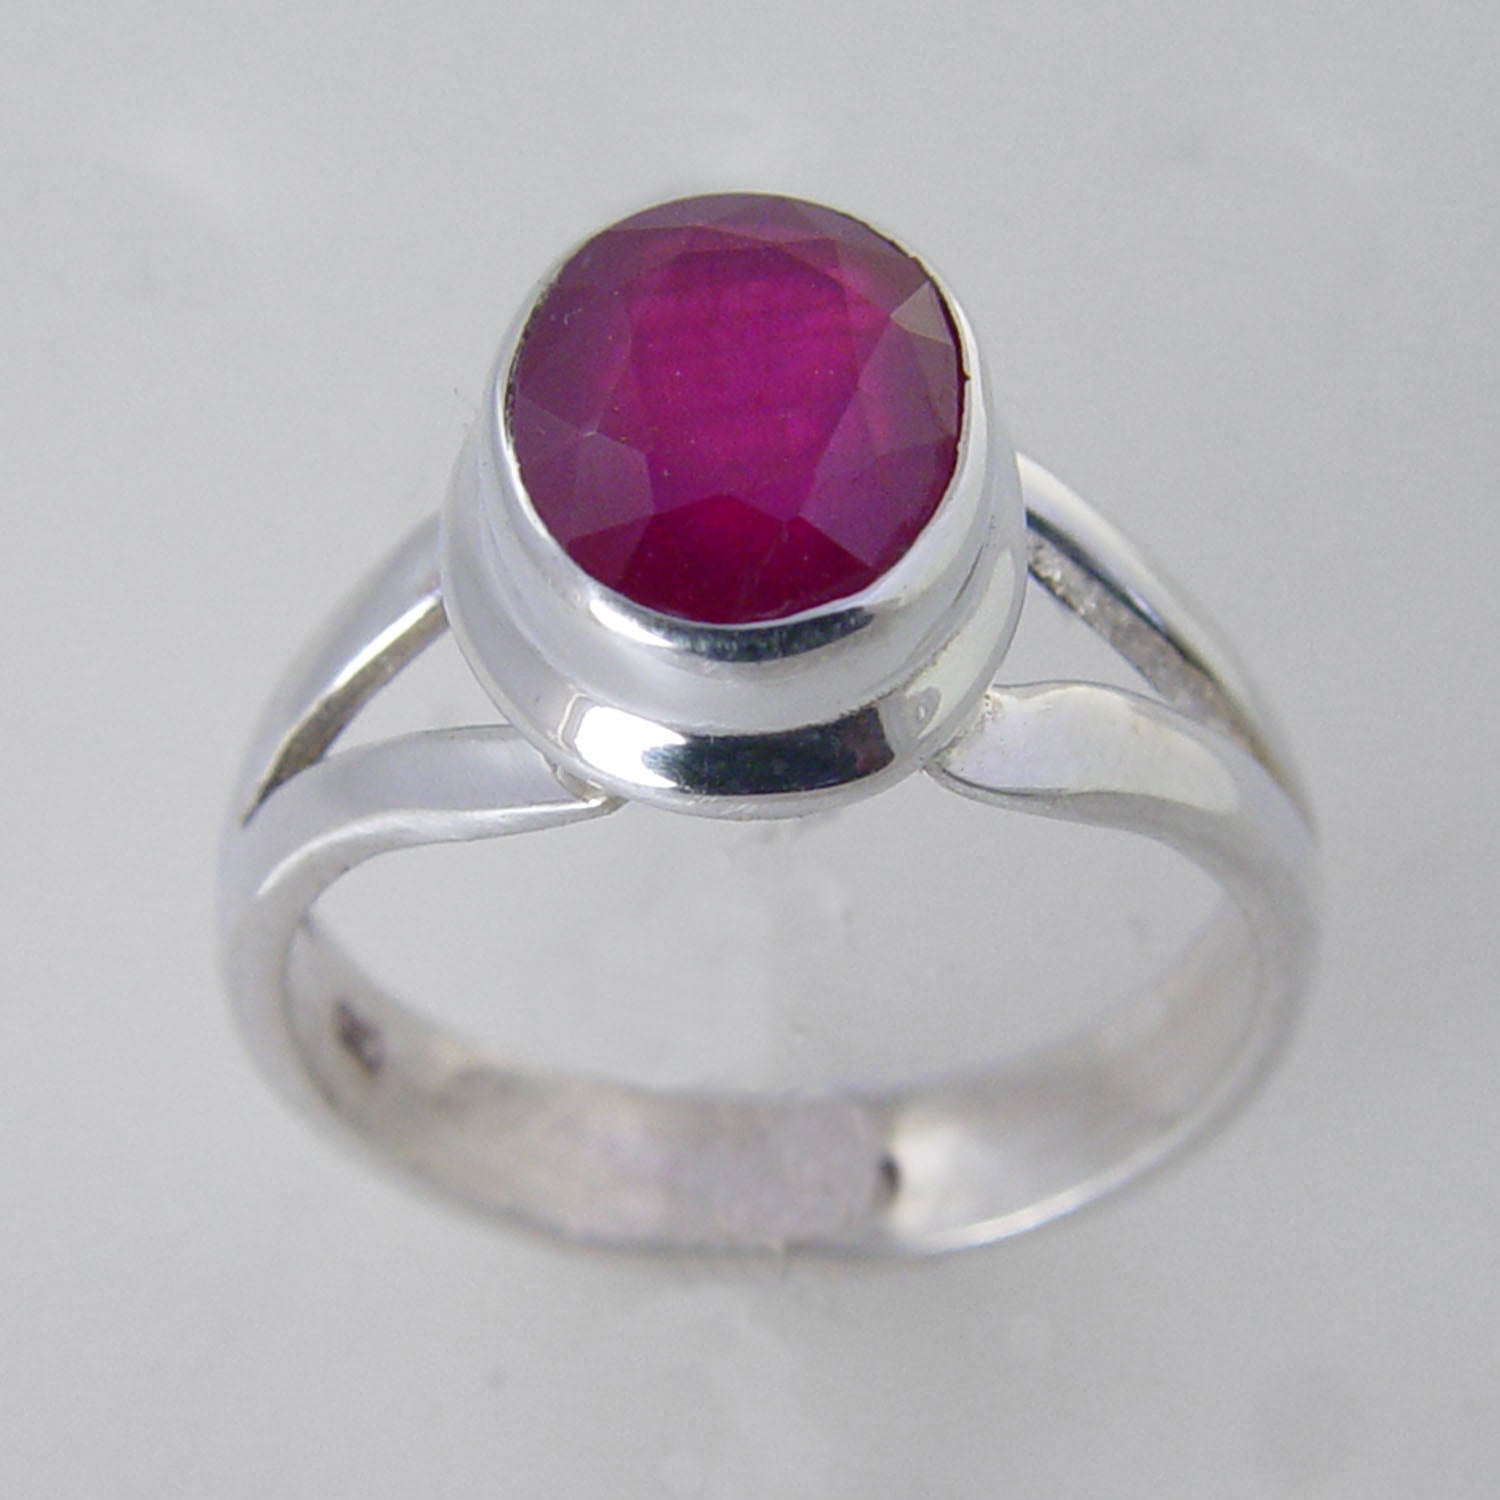 Ruby 2.6 ct Faceted Oval Sterling Silver Ring, Size 6